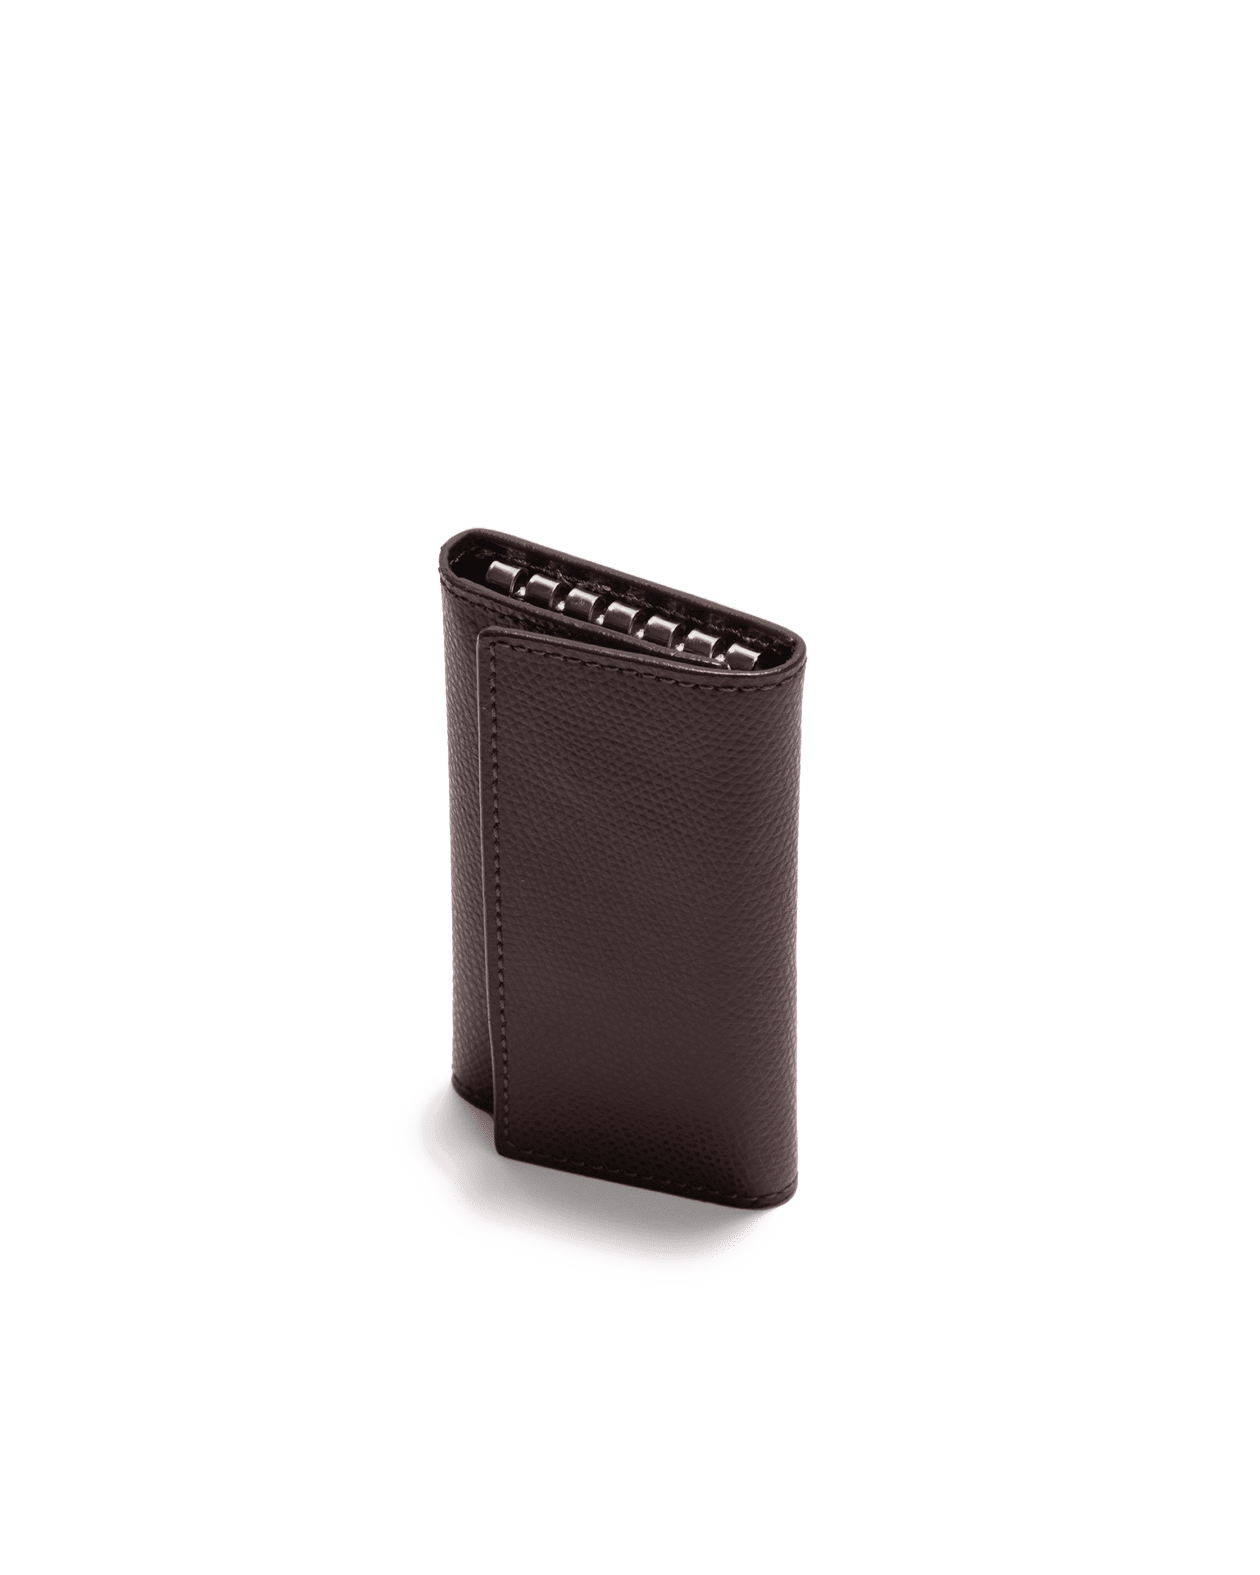 Key Holder Brown Saffiano Leather